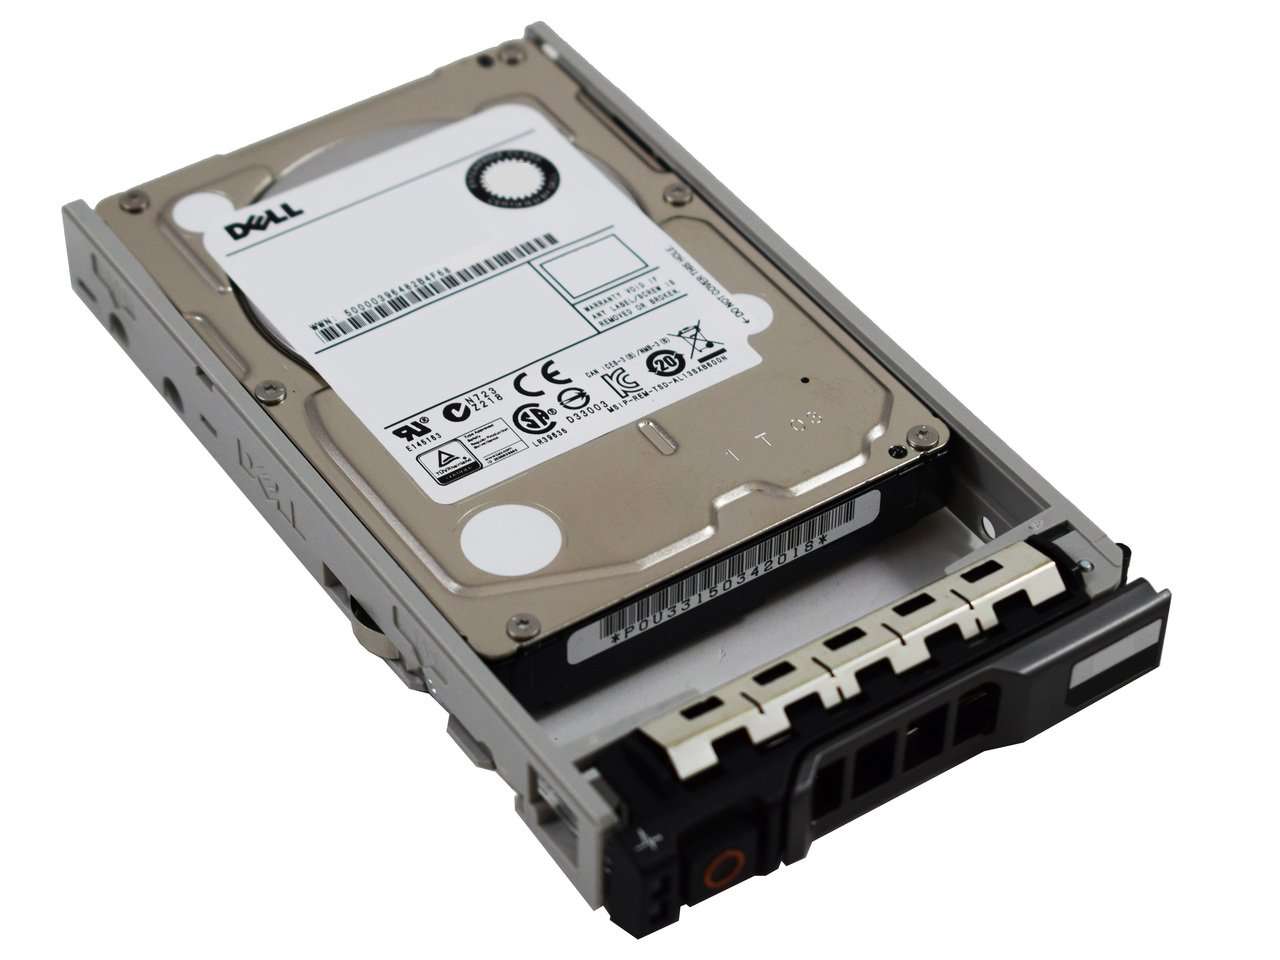 Dell G13 KXPGD 600GB 15K RPM SAS 12Gb/s 512n 2.5" Manufacturer Recertified HDD